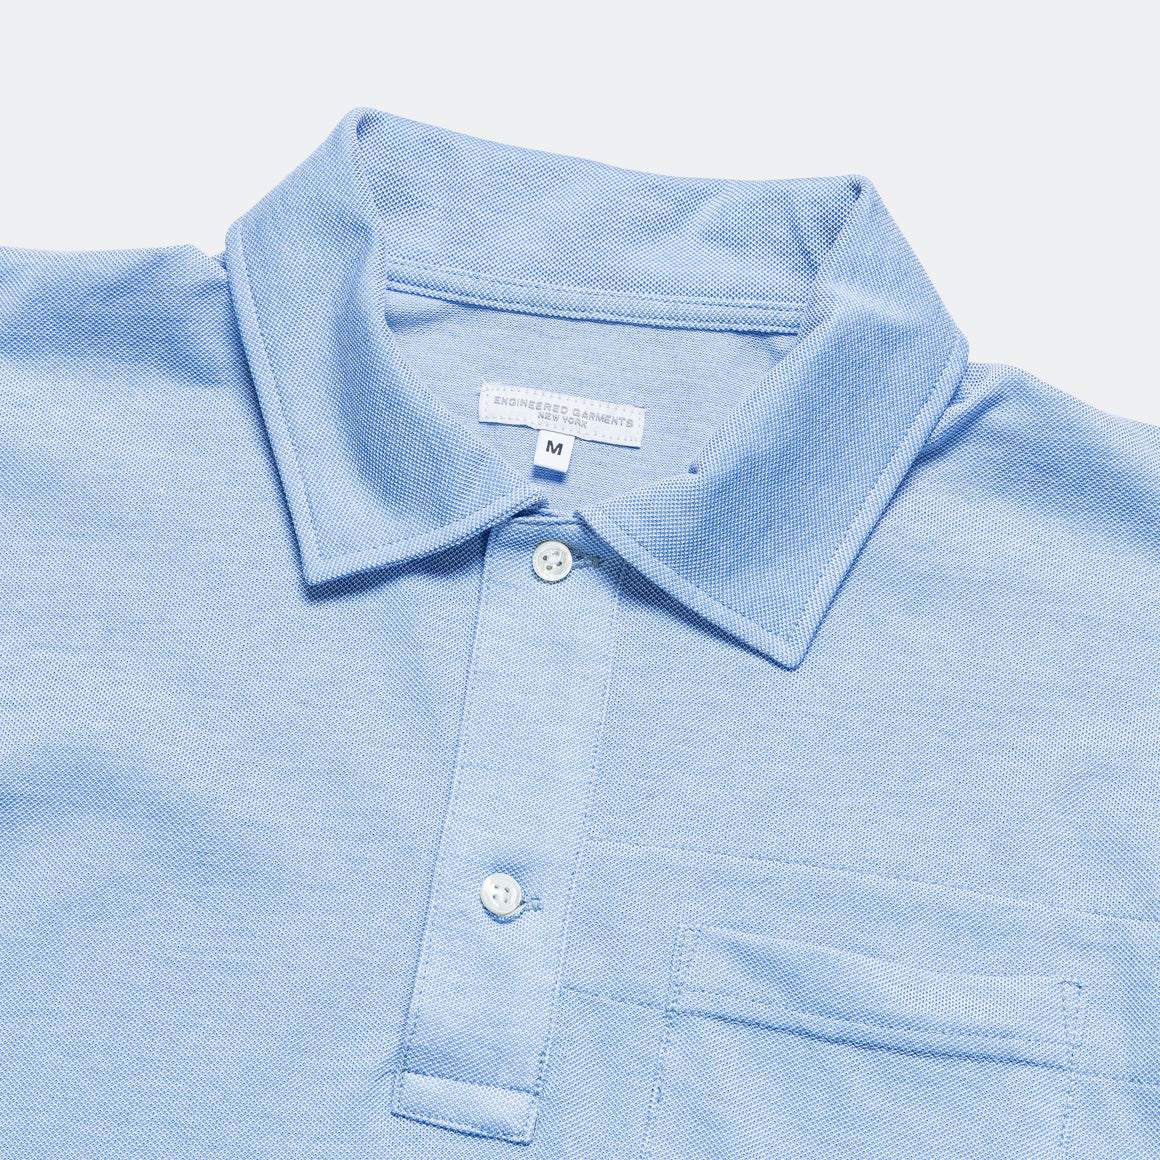 Engineered Garments - Polo Shirt Combo - Lt. Blue Cotton Pique - UP THERE